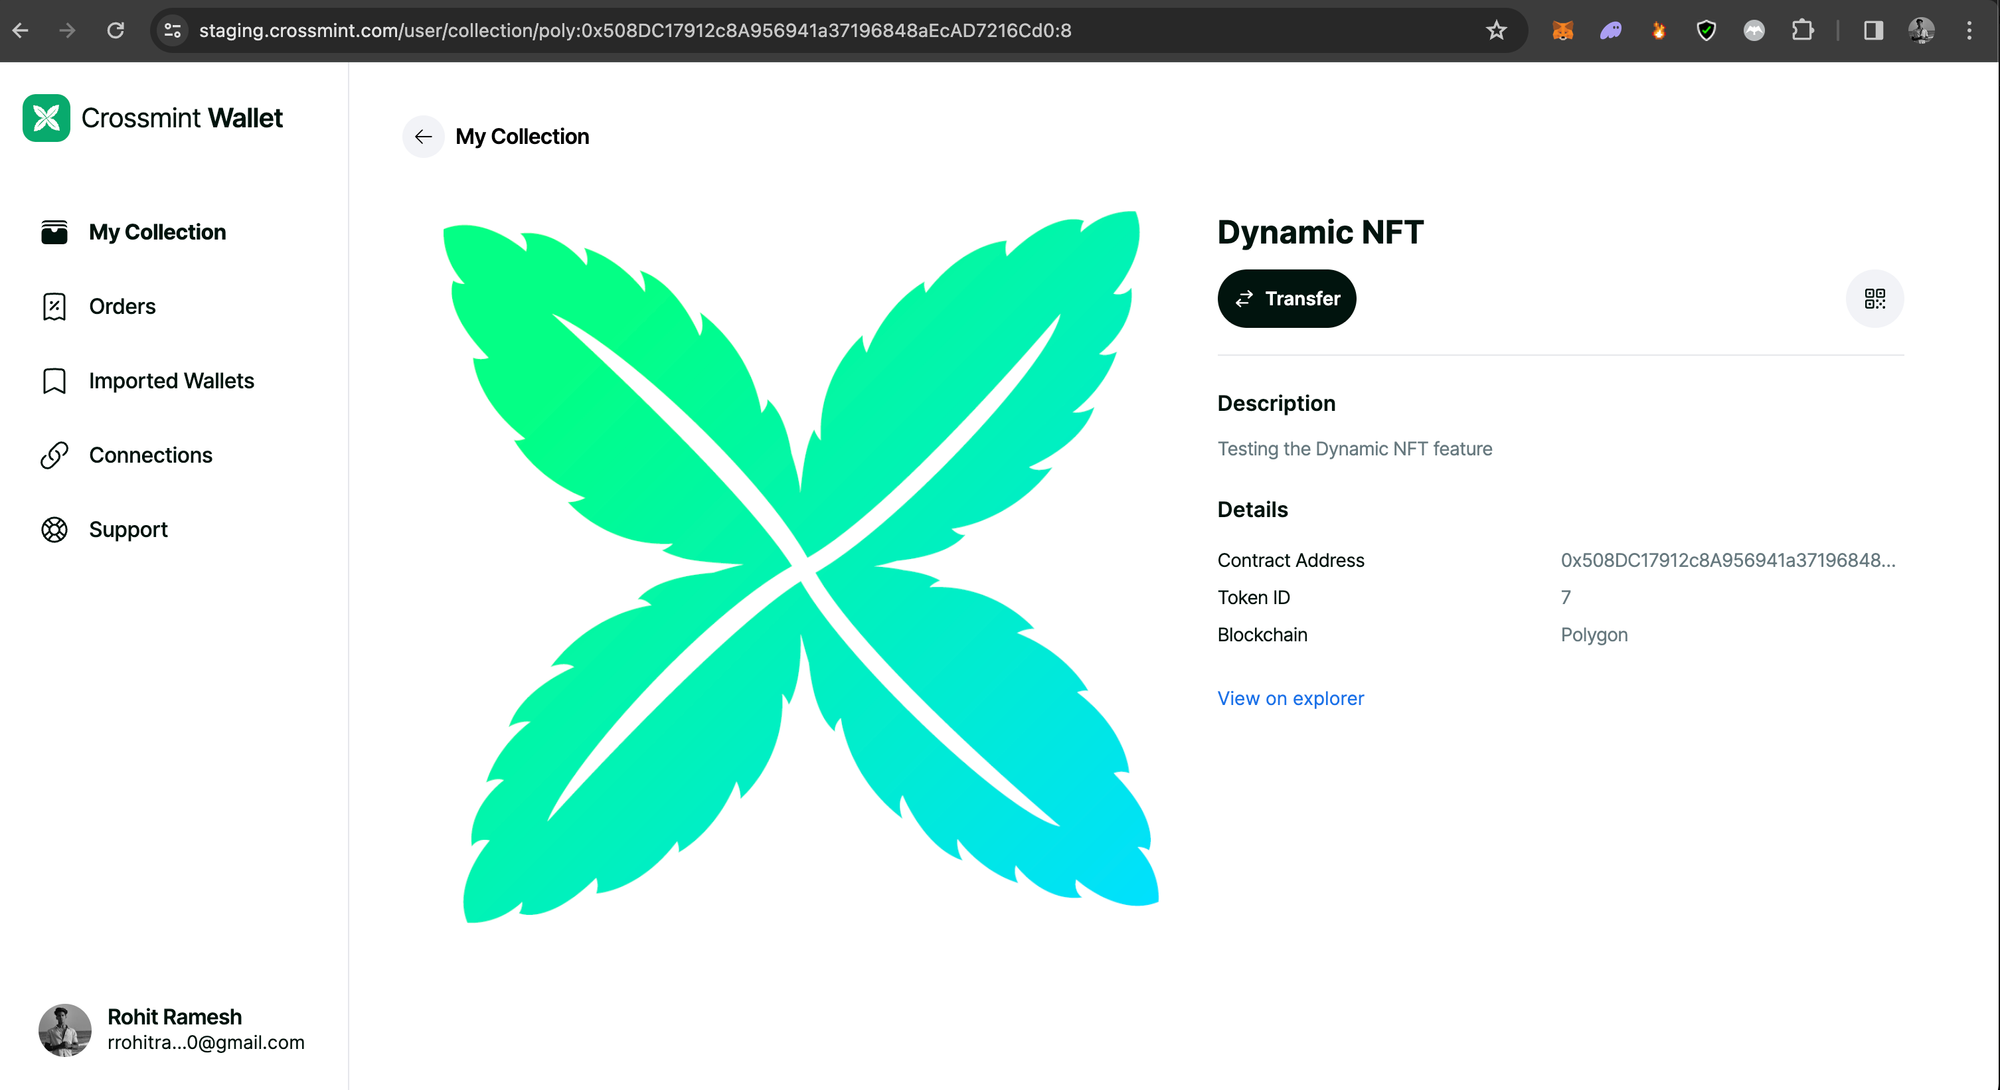 How to Create Dynamic NFTs? The Ultimate Guide